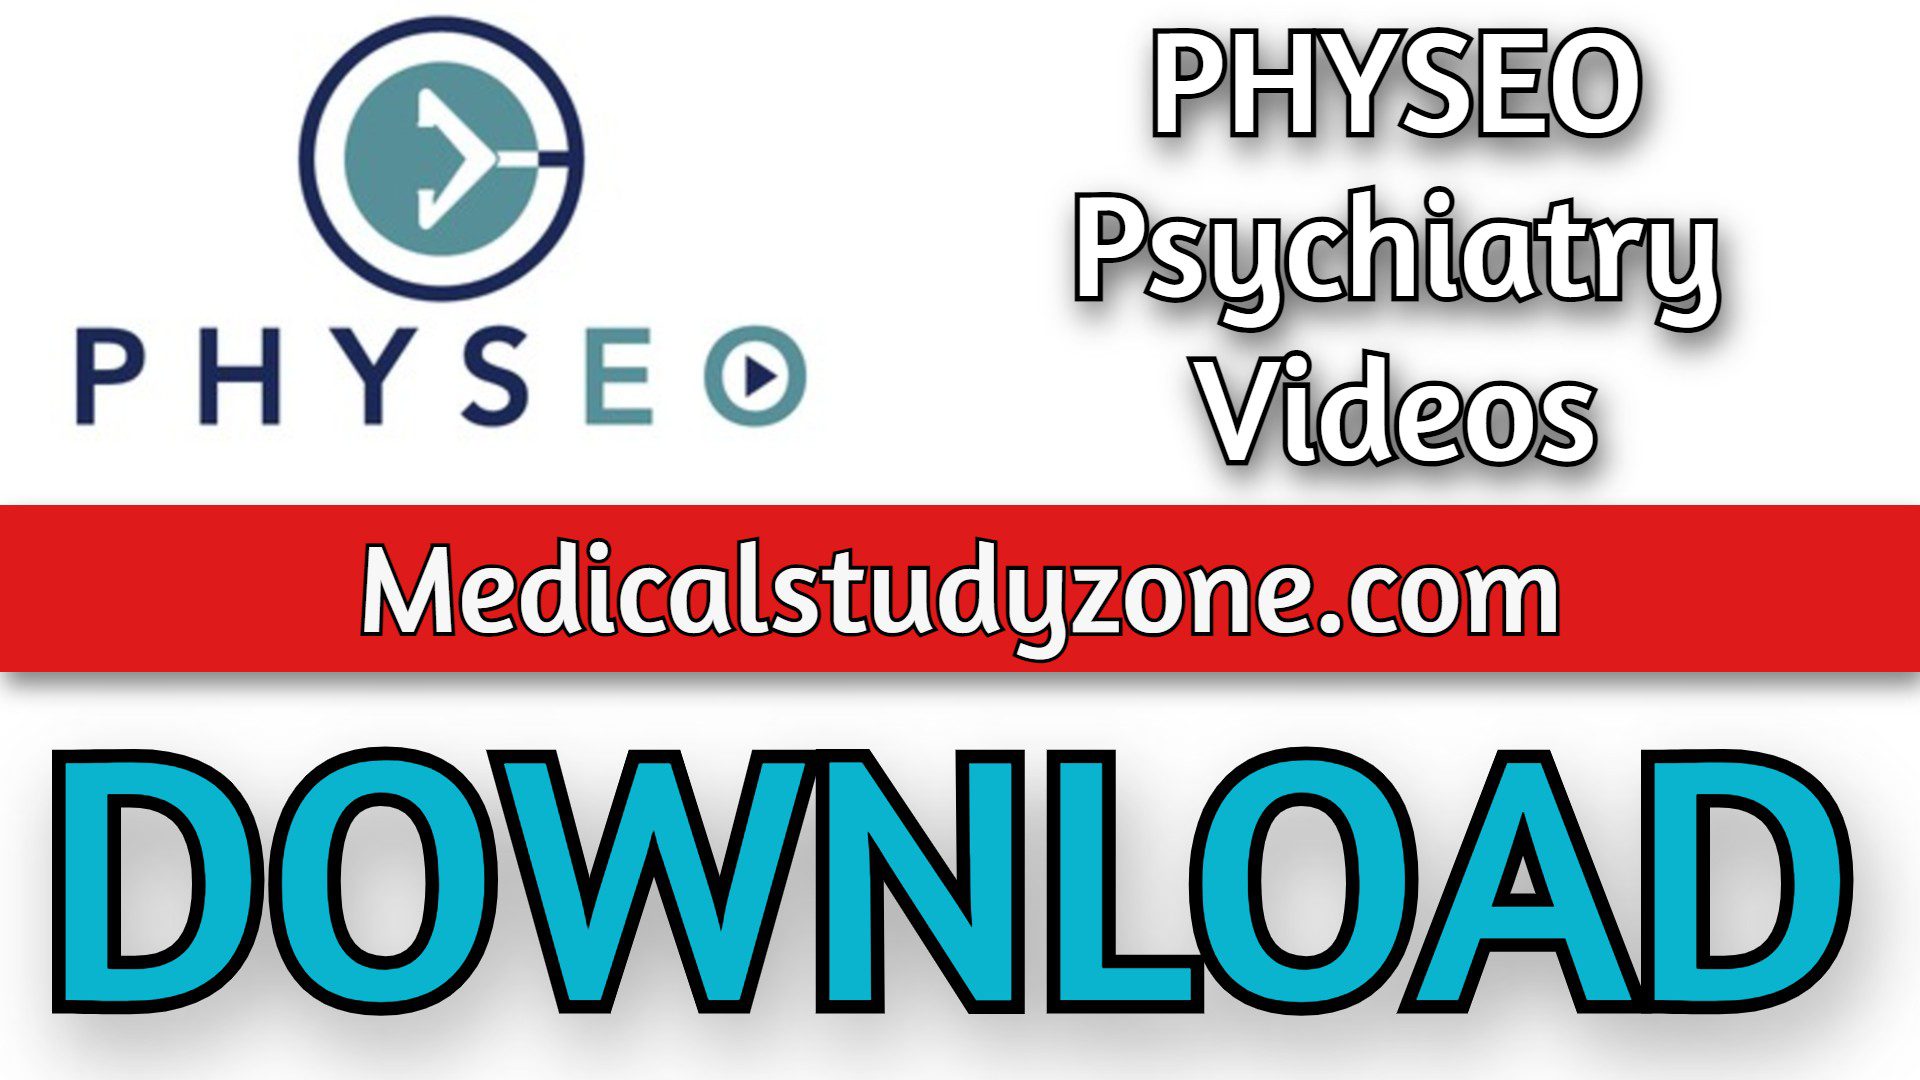 PHYSEO Psychiatry Videos 2021 Free Download